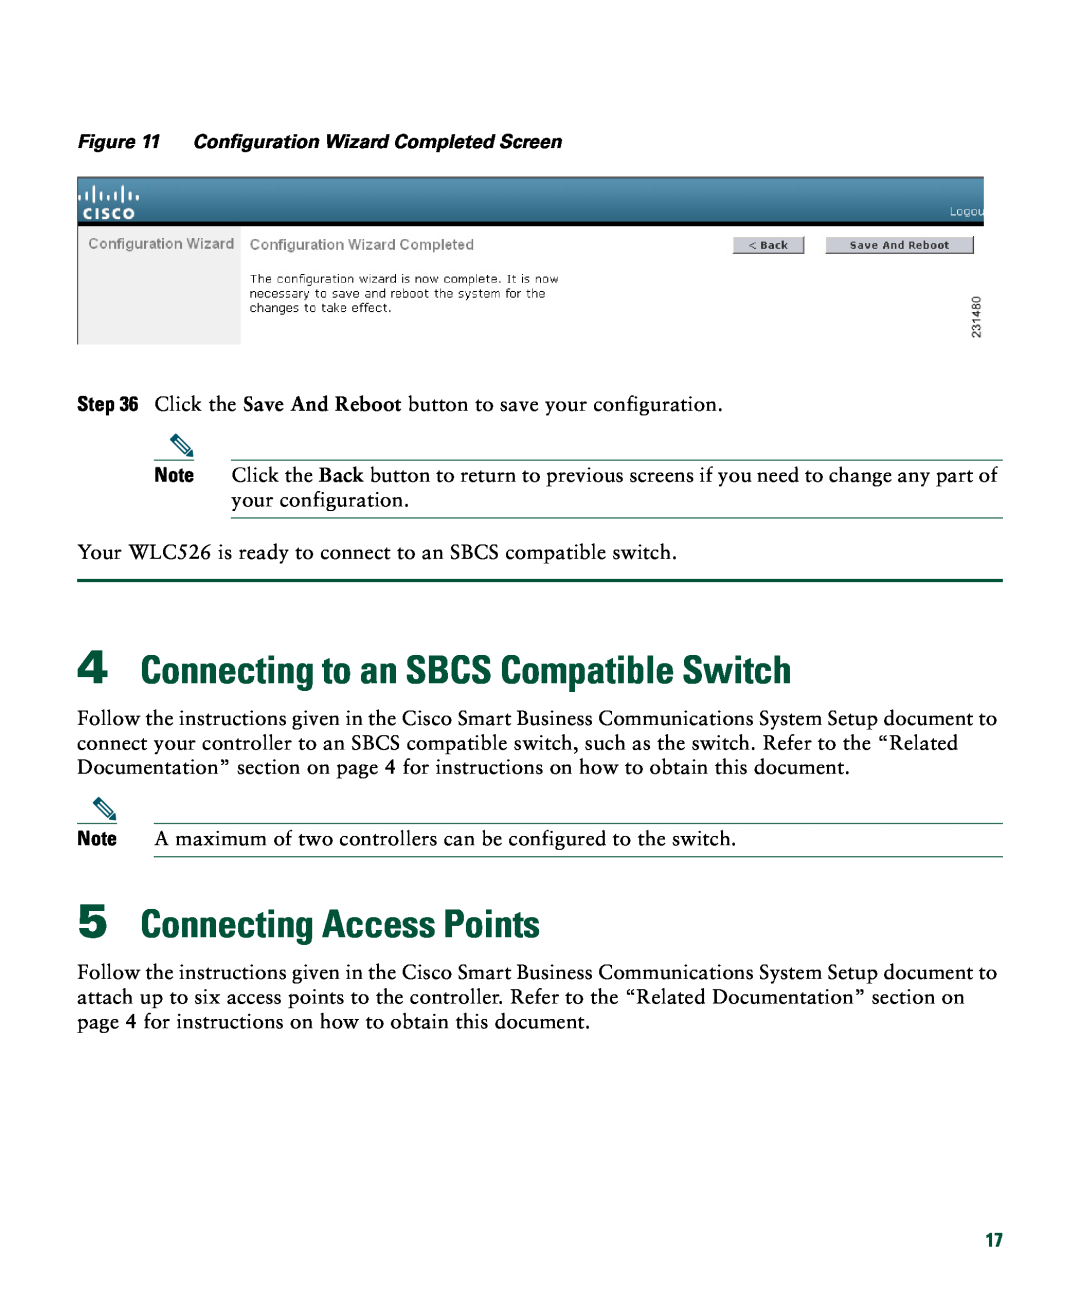 Cisco Systems 526 quick start Connecting to an SBCS Compatible Switch, Connecting Access Points 